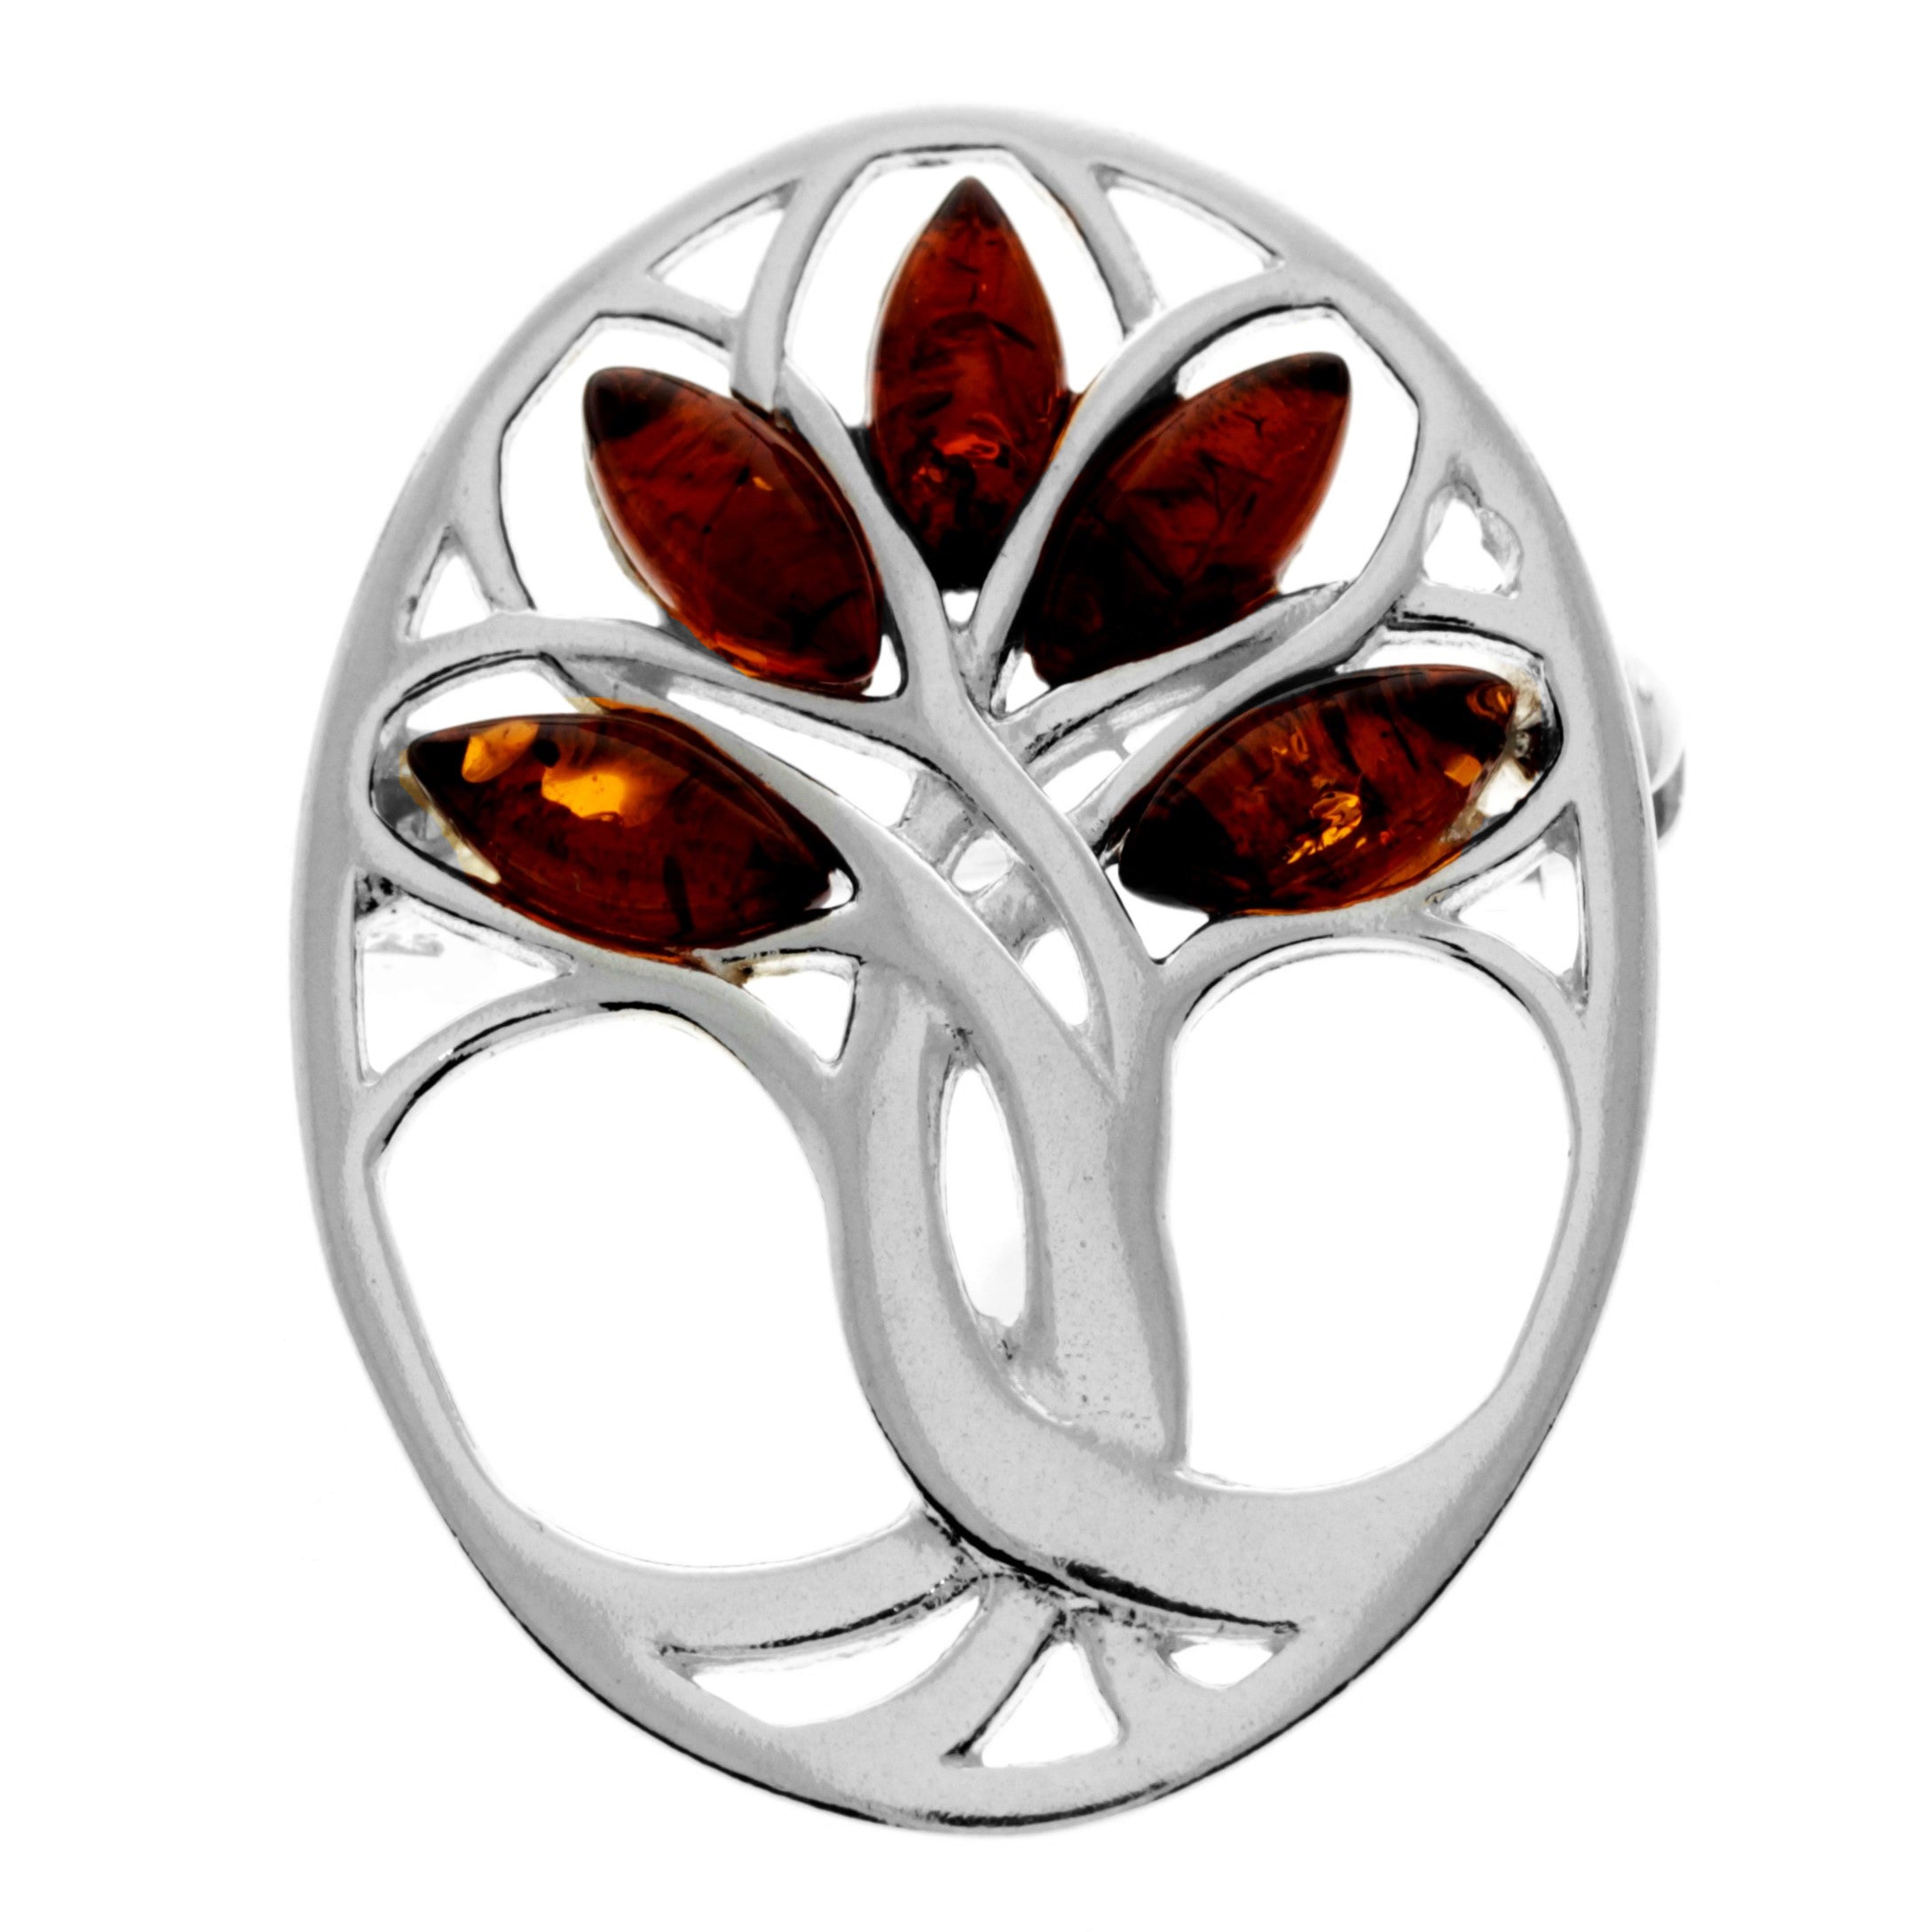 925 Sterling Silver & Genuine Baltic Amber Tree of Life Brooch - GL824